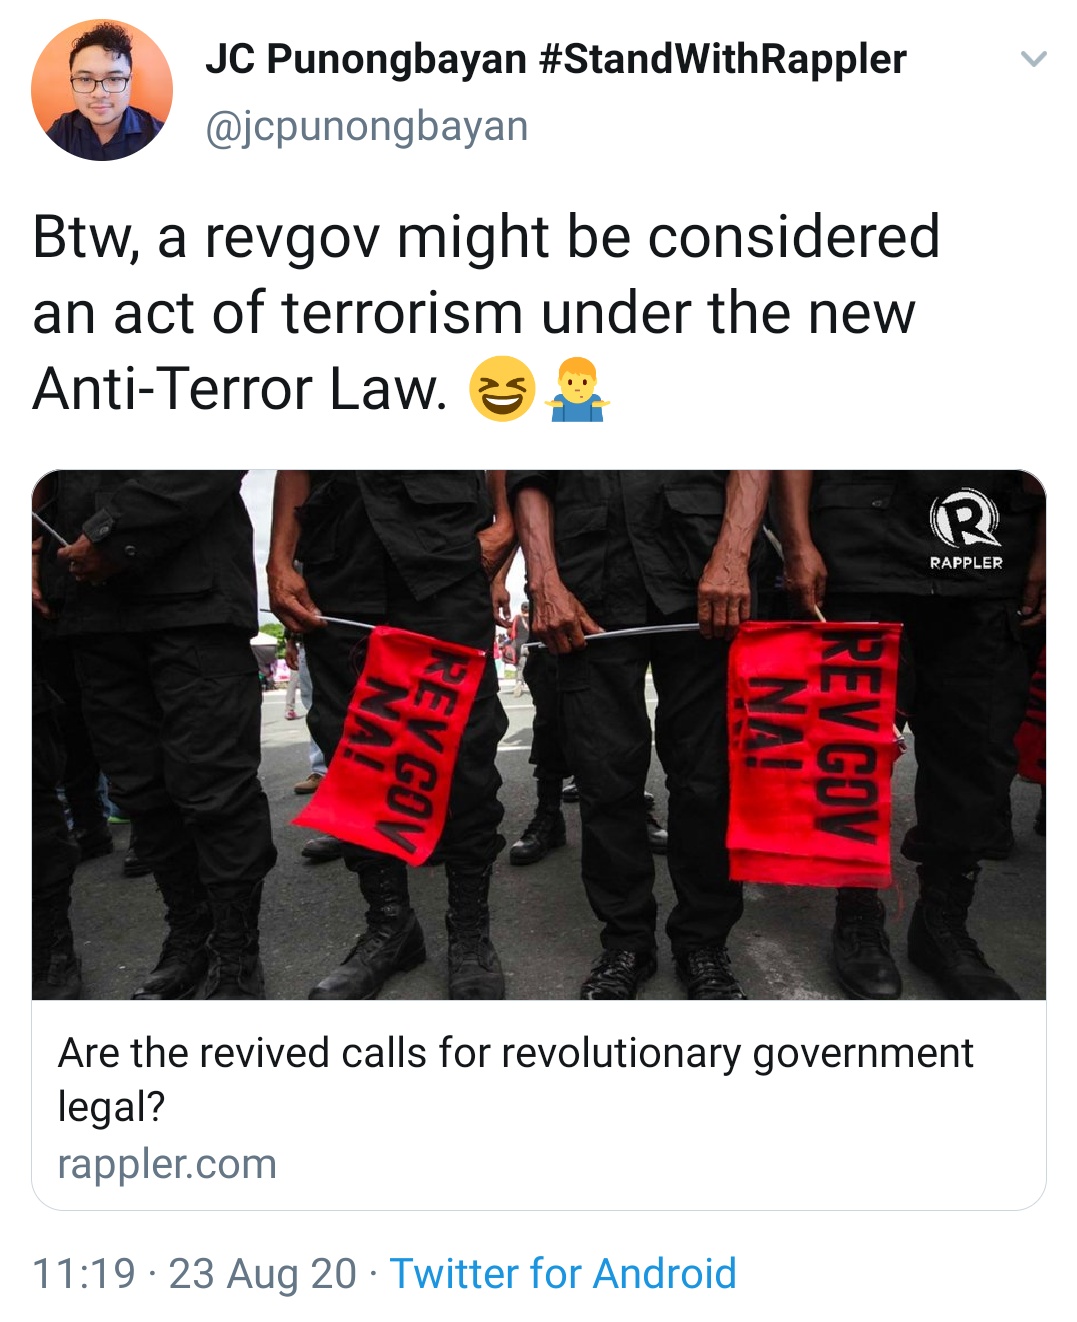 Btw, a revgov might be considered an act of terrorism under the new Anti-Terror Law.